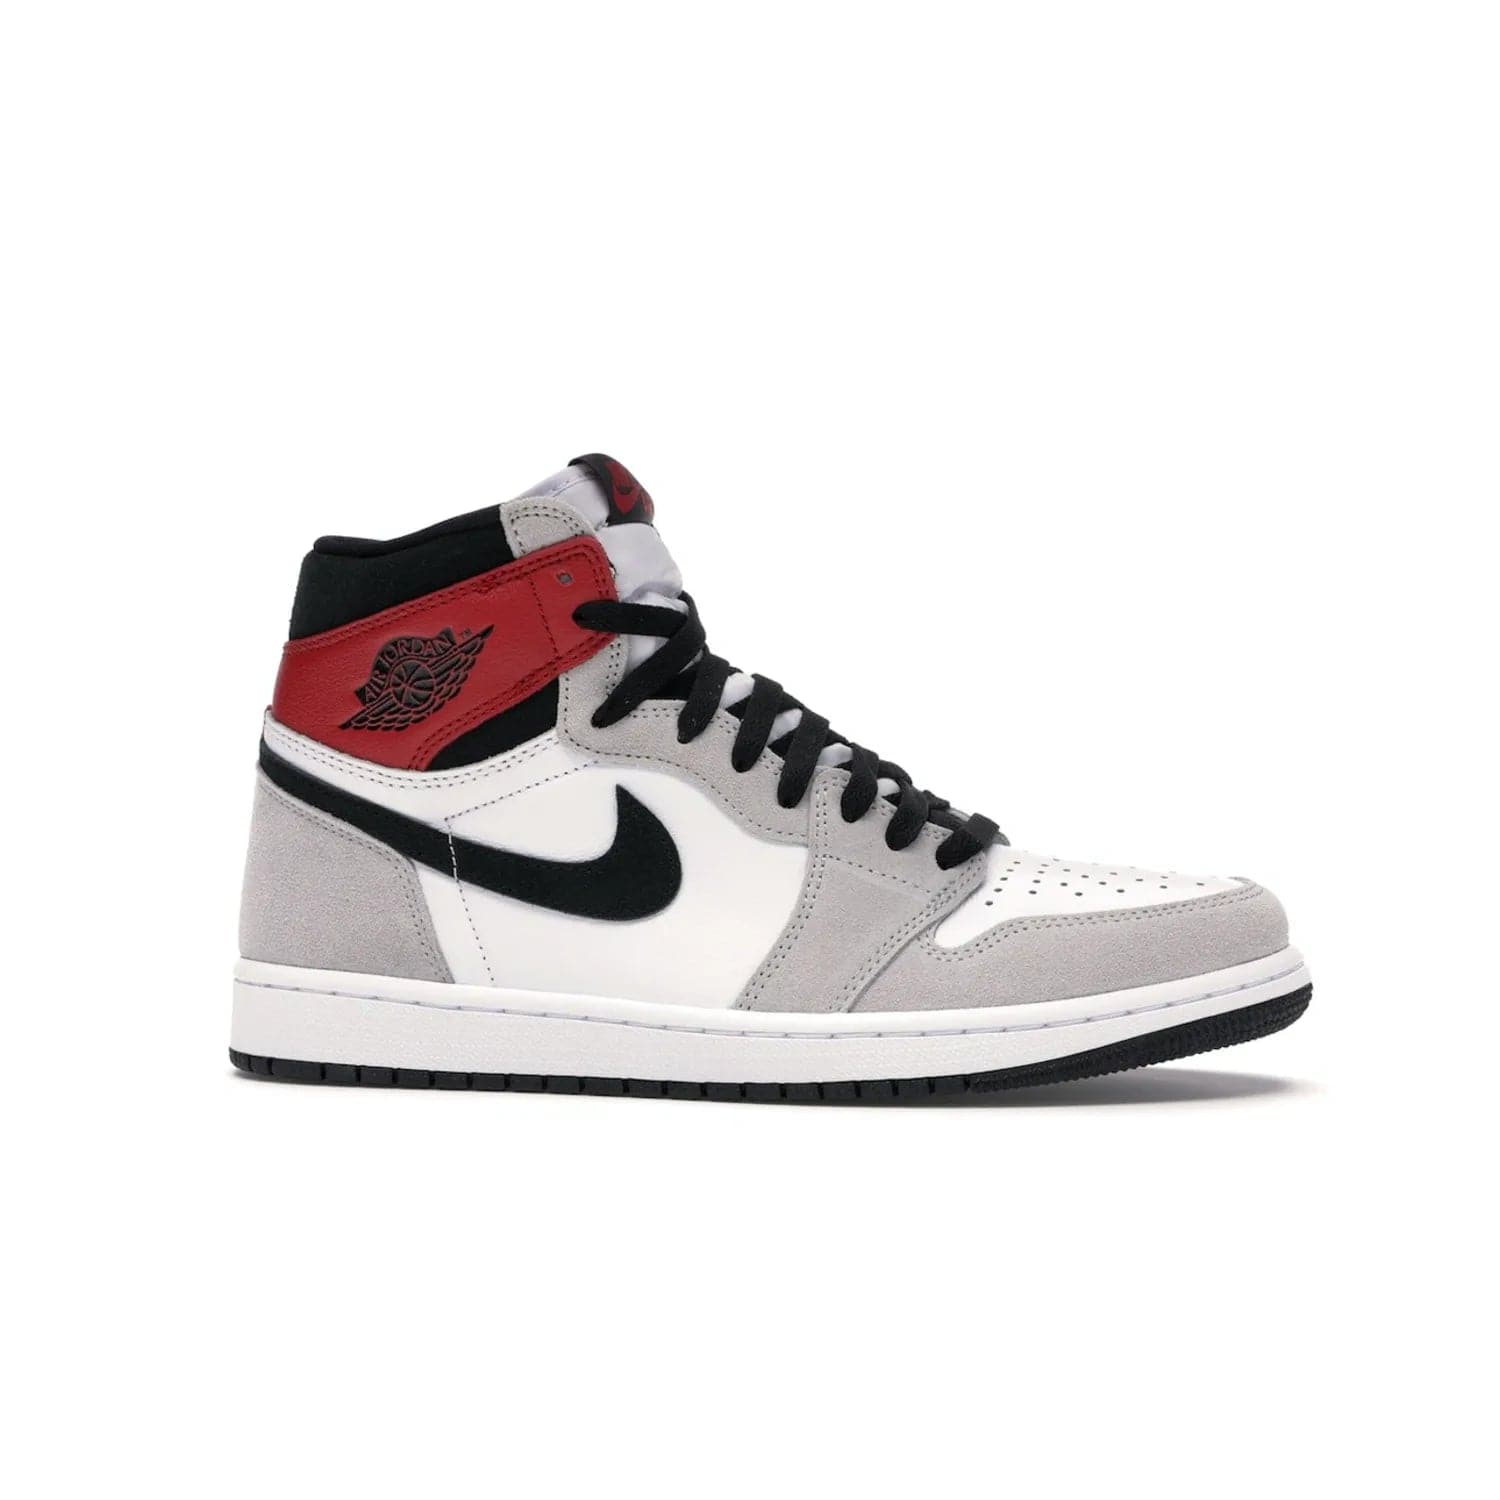 Jordan 1 Retro High Light Smoke Grey - Image 2 - Only at www.BallersClubKickz.com - Comfortable and stylish, Jordan 1 Retro High Light Smoke Grey offers a unique spin on a classic design. White leather, grey suede, red leather and black details are set on a white midsole and black outsole. Get the sneaker released in July 2020 and add a twist to your wardrobe.